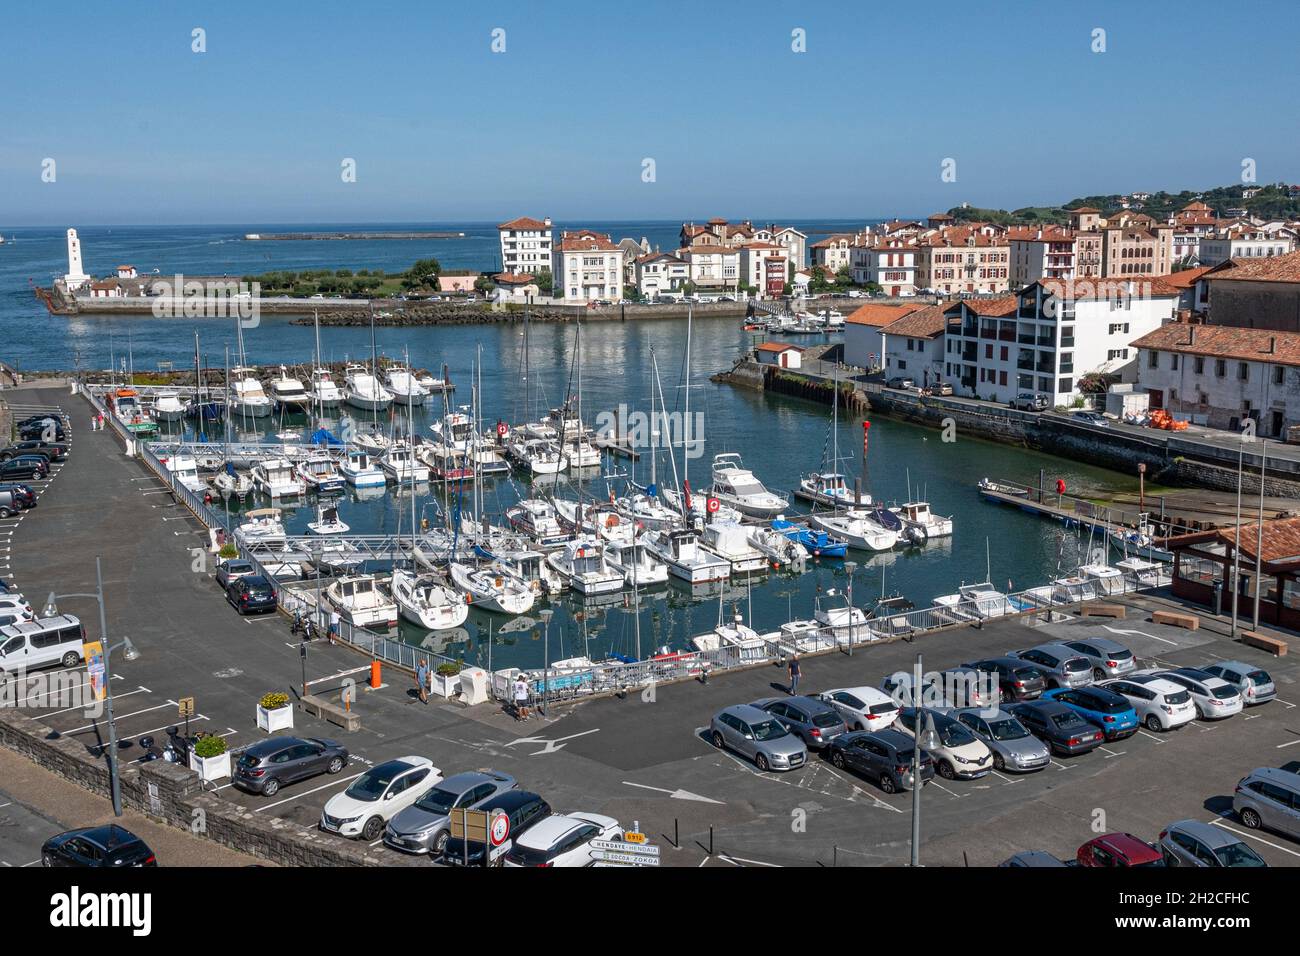 La Tour Saint Jean High Resolution Stock Photography and Images - Alamy